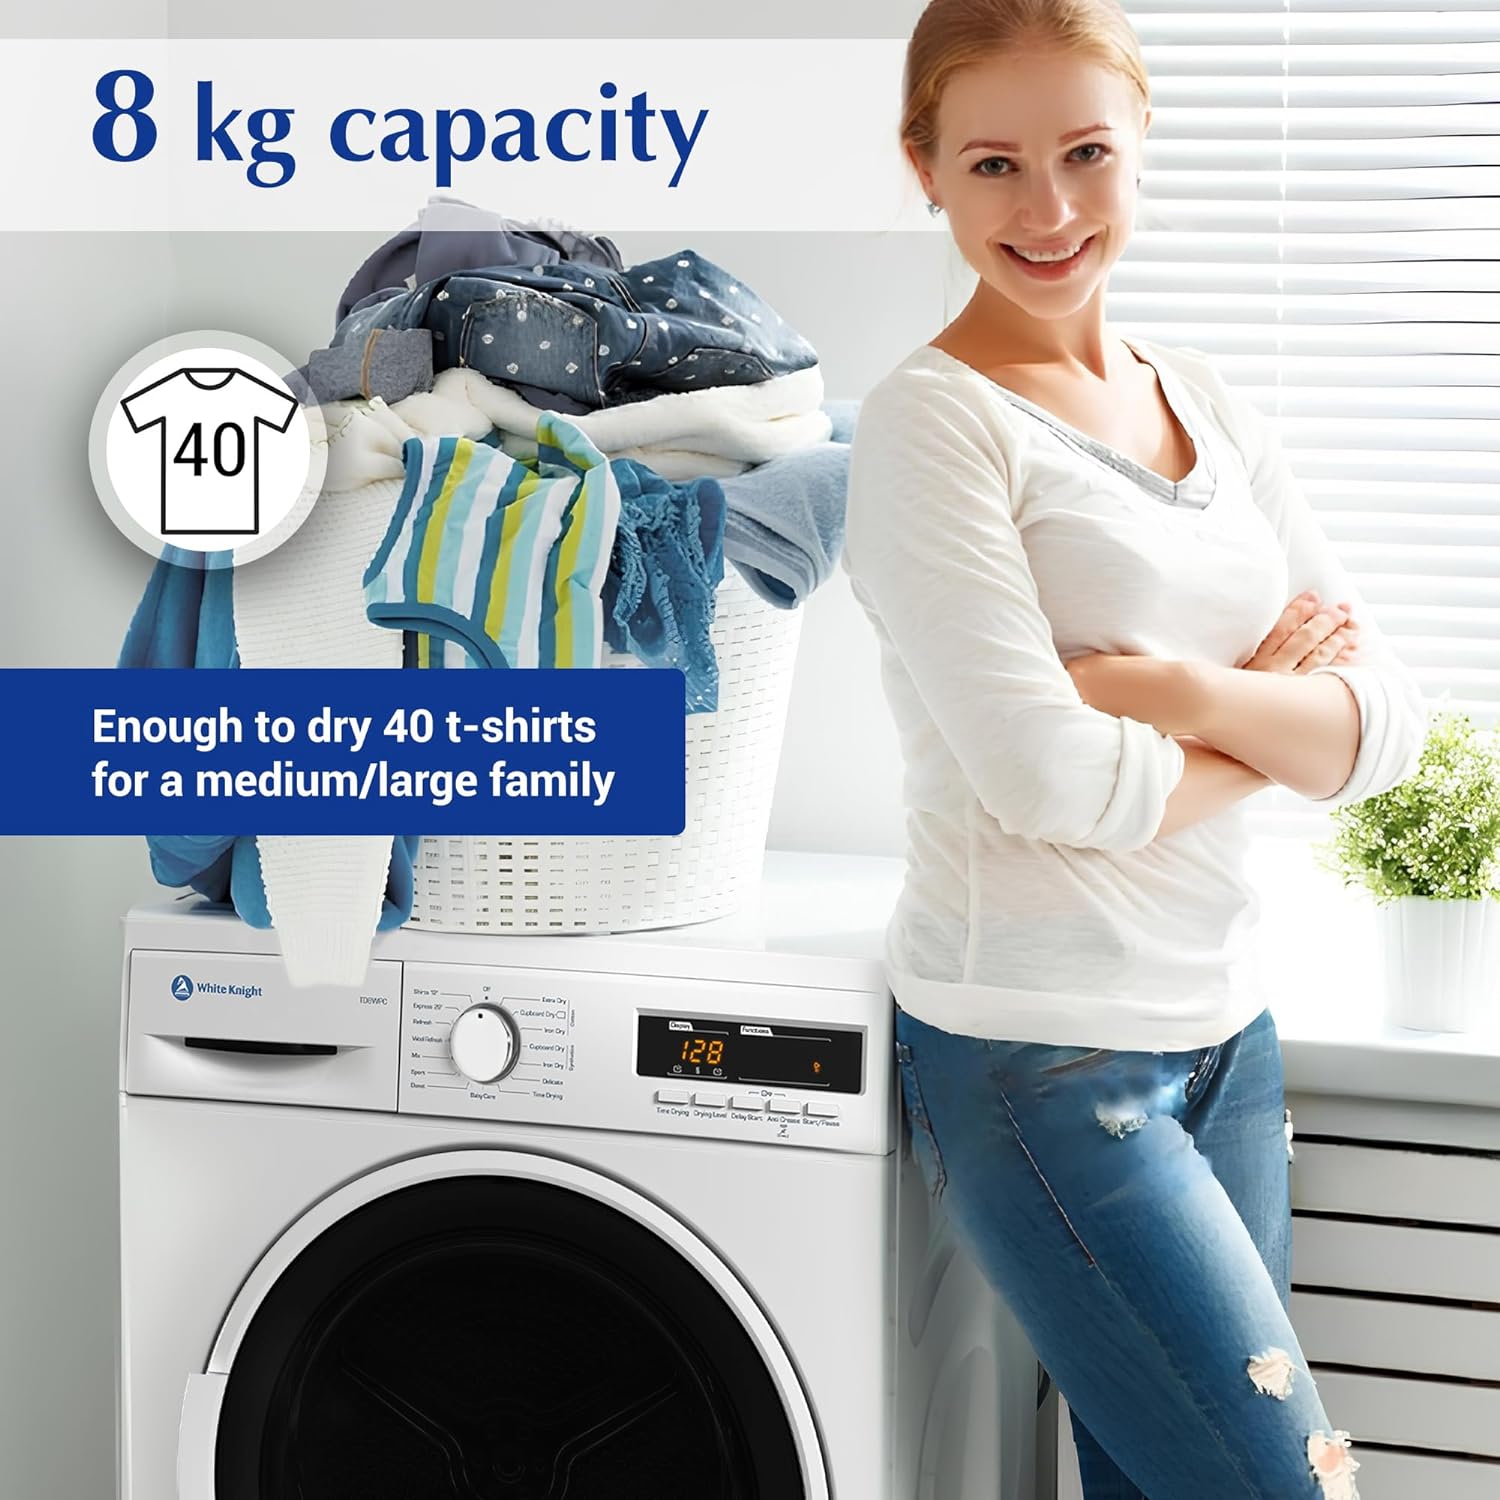 White Knight Condenser Sensor Tumble Dryer 8kg TD8WPC Freestanding B Rated - Amazing Gadgets Outlet